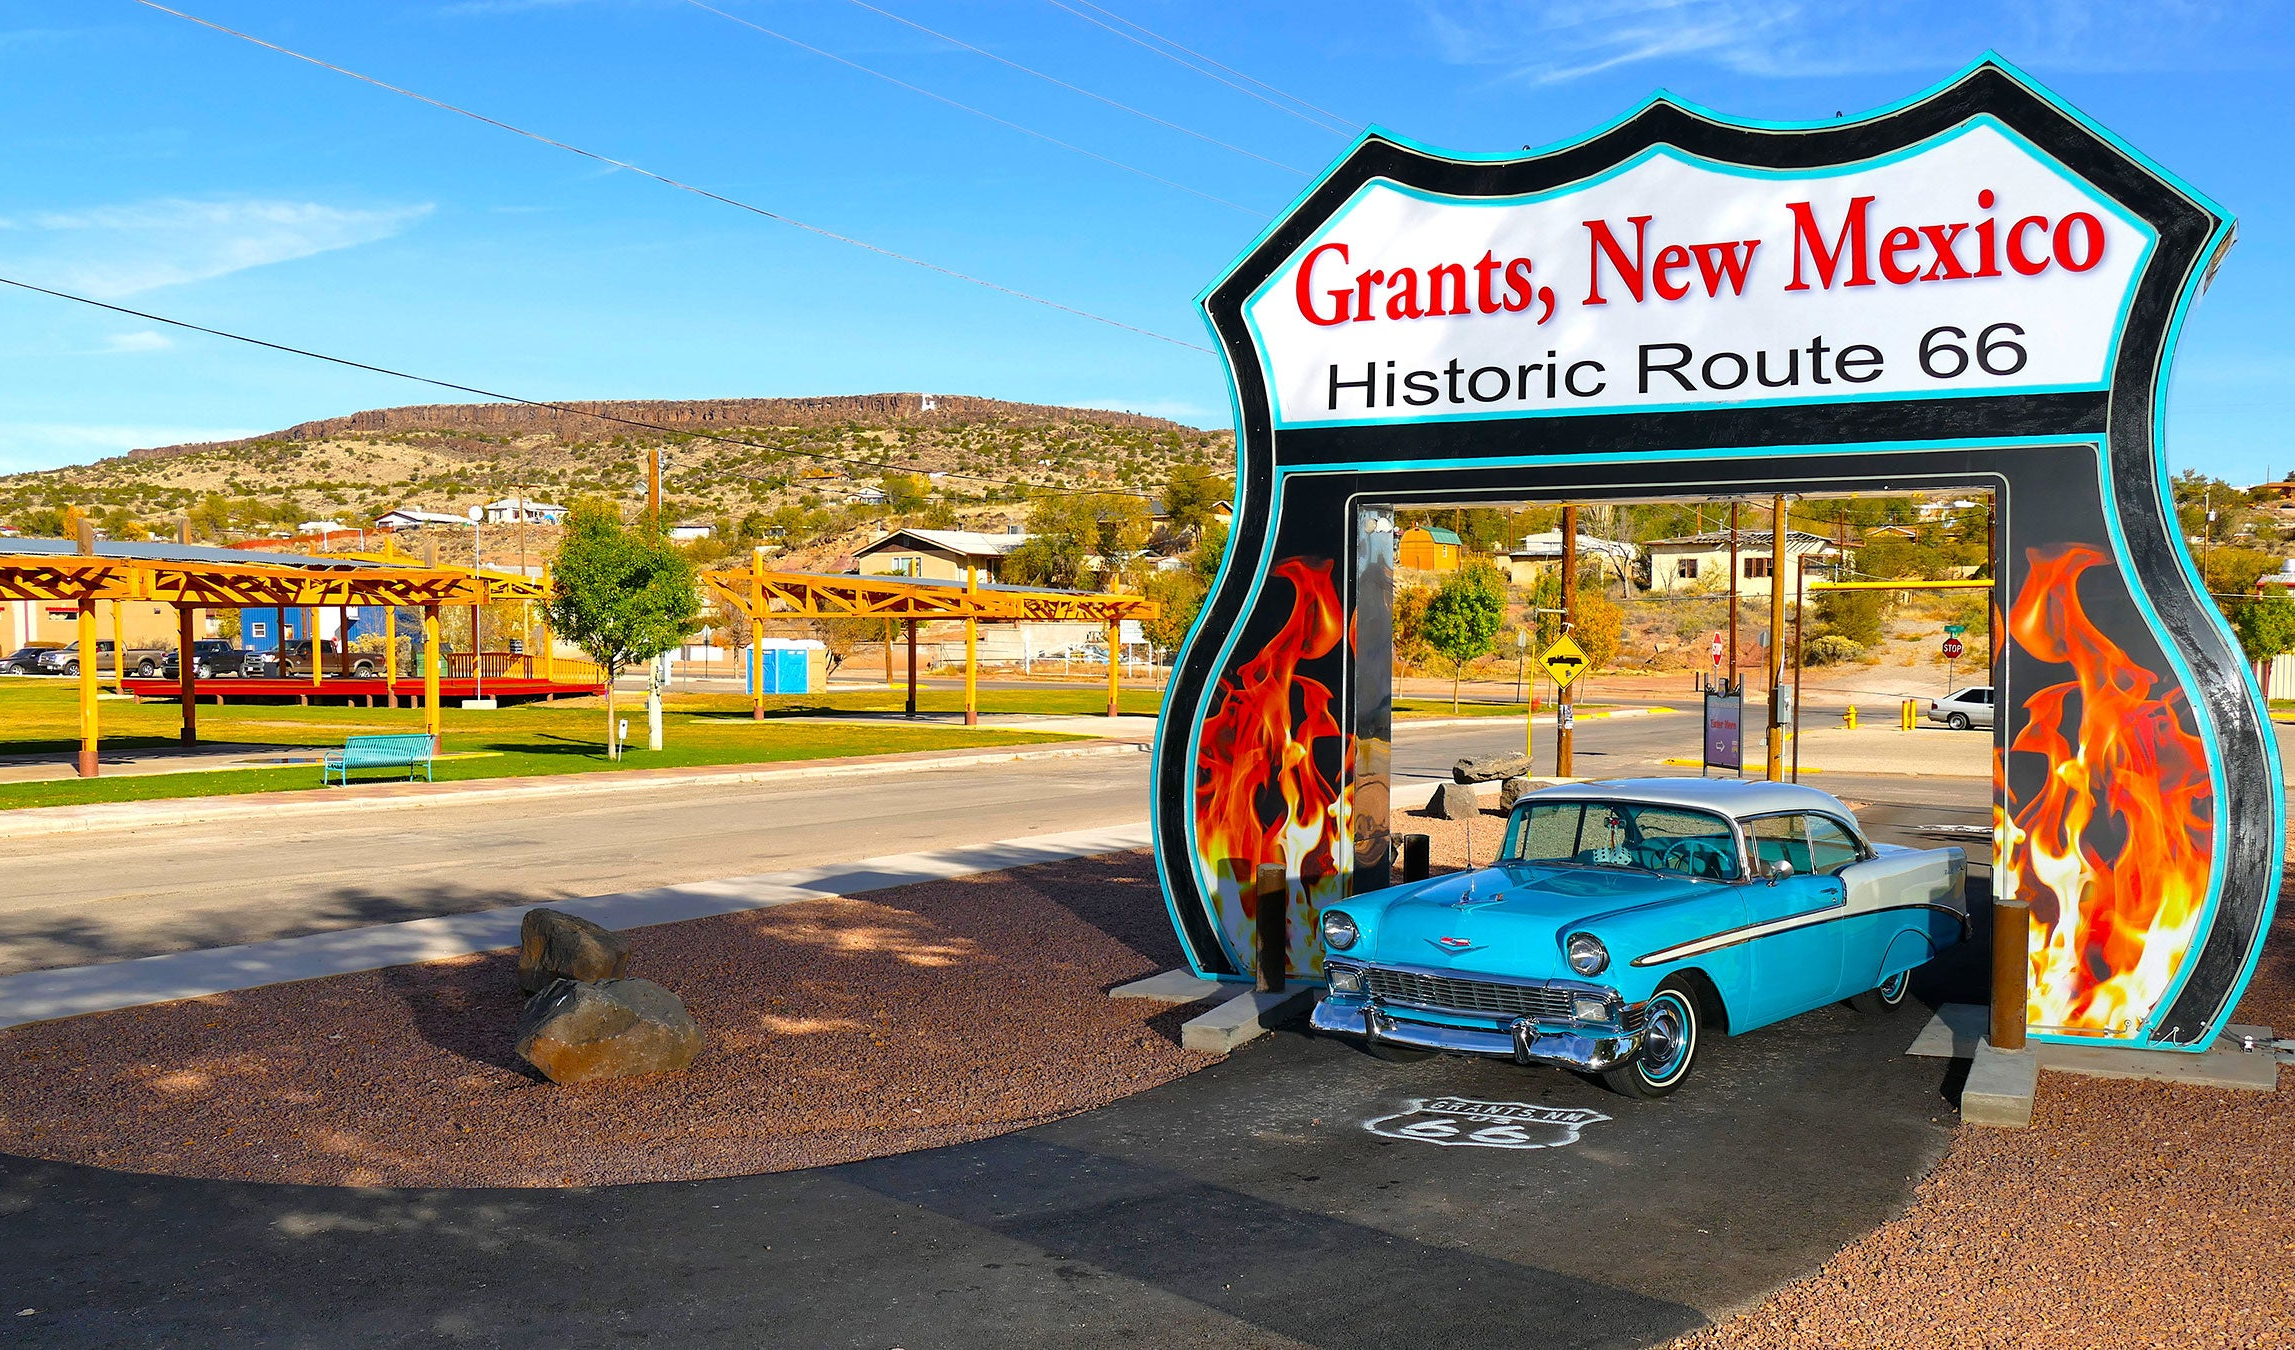 Grants, New Mexico Historic Route 66 image with car